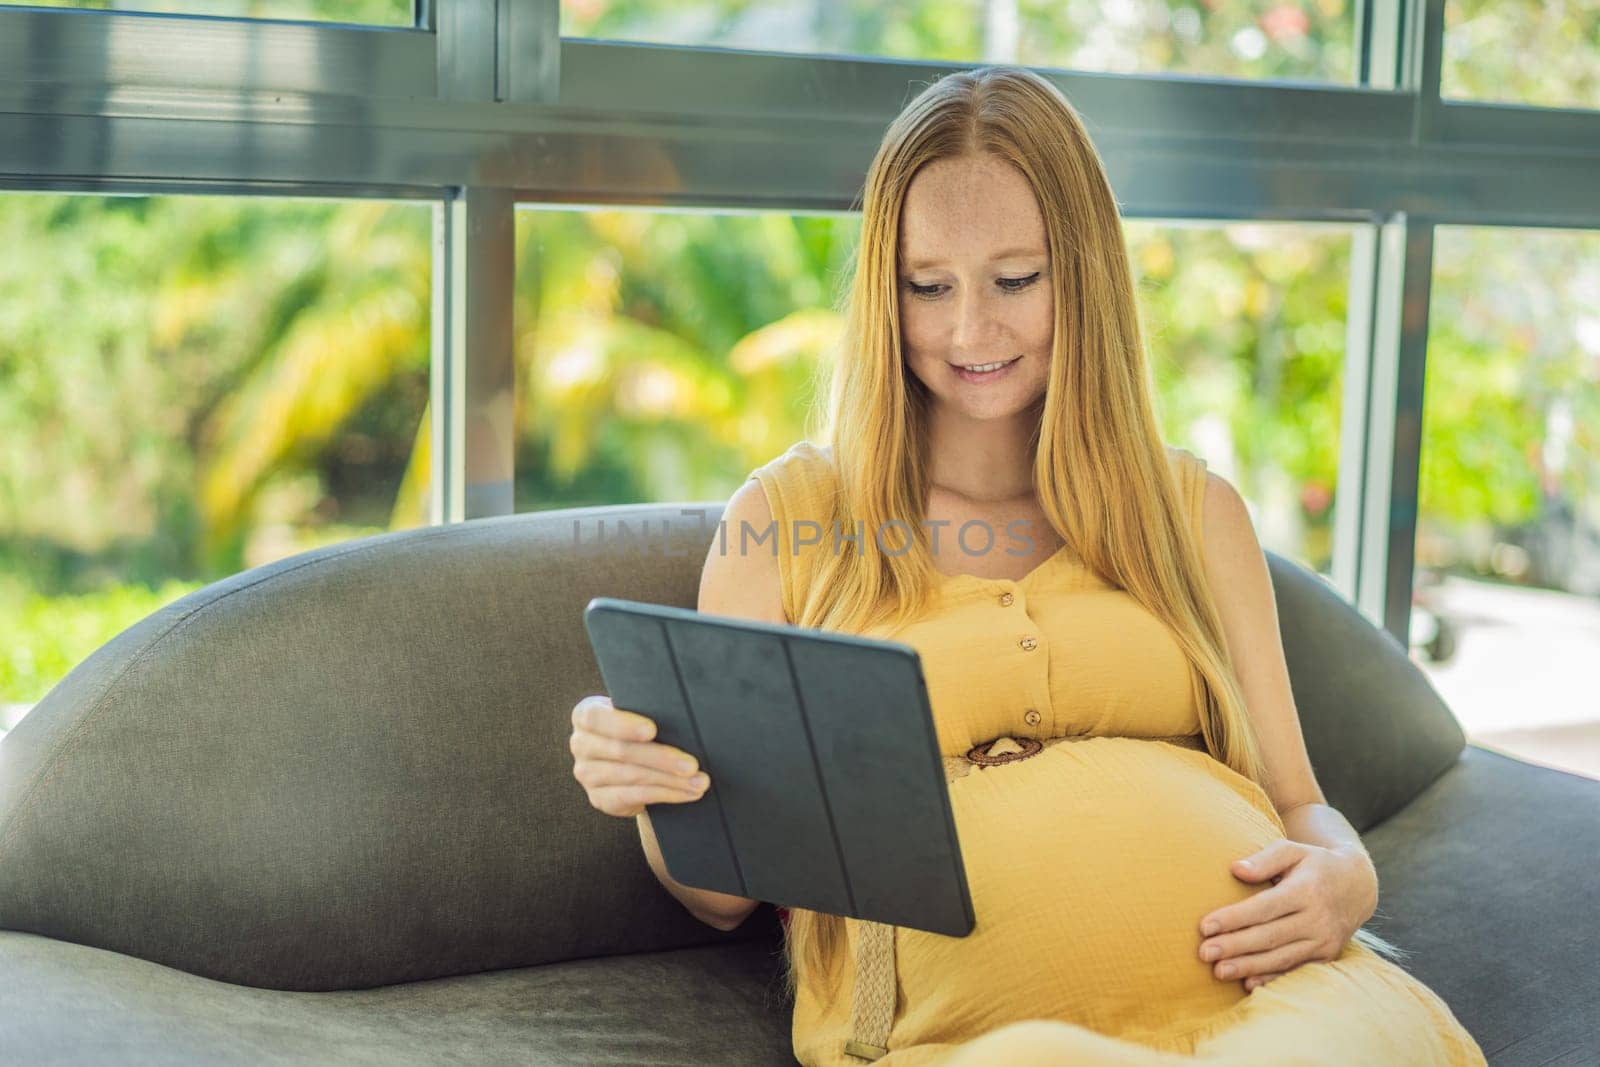 Mobile pregnancy online maternity application. Pregnant mother using phone. Pregnancy, medicine, pharmaceutics, health care and people concept.